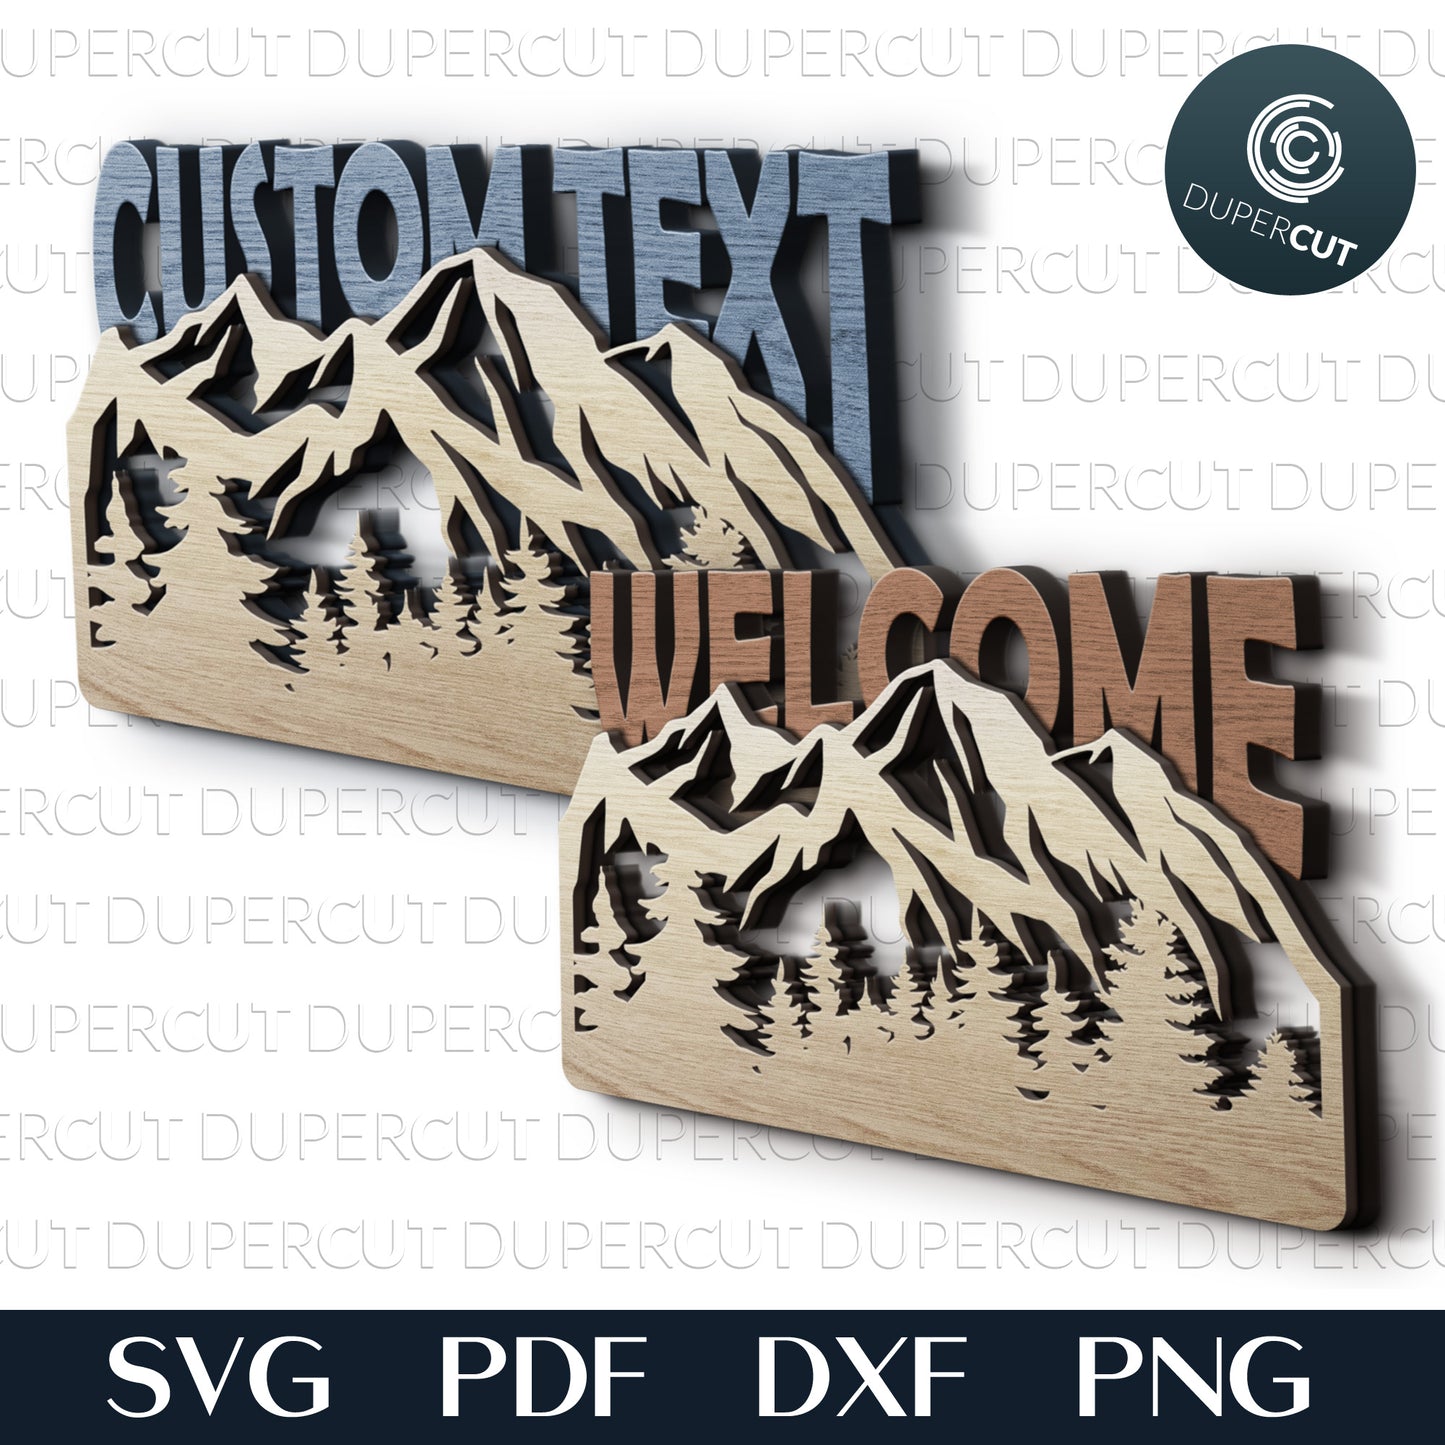 Personalized custom welcome sign - mountains scene - SVG PDF DXF files for laser cutting, engraving, Glowforge, Cricut, Silhouette Cameo, CNC plasma machines